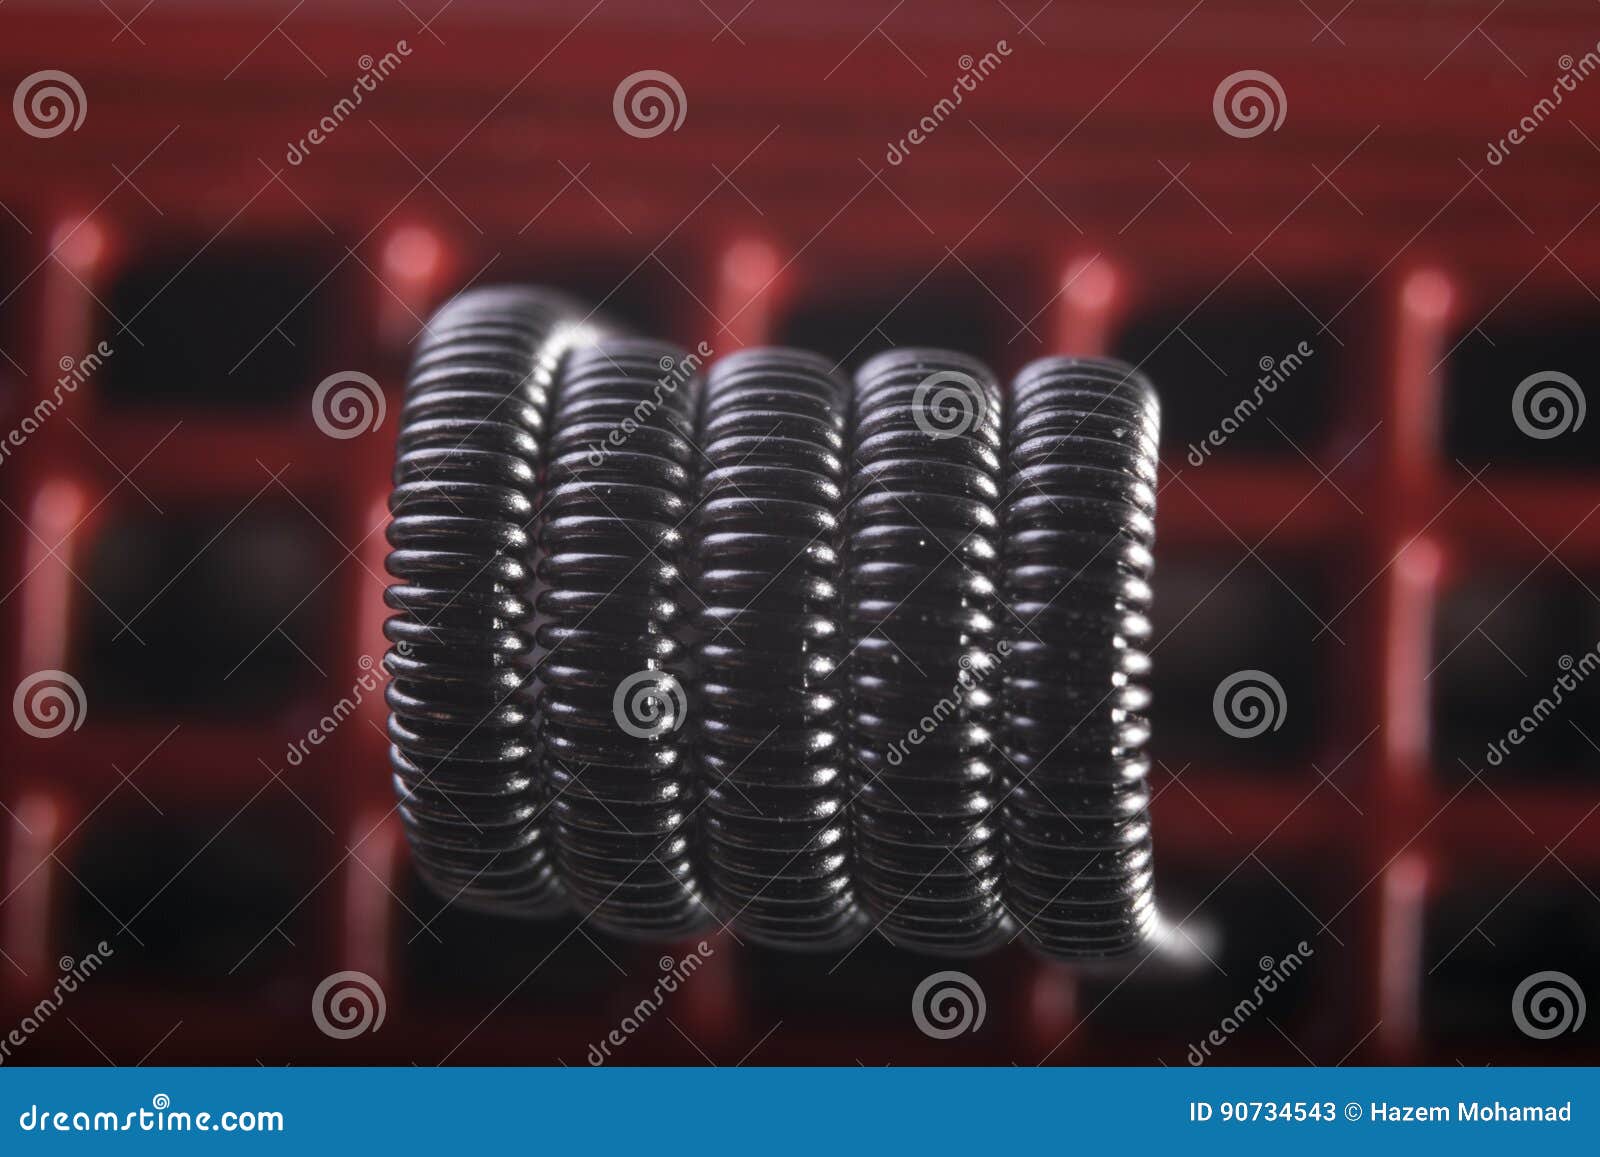 twisted multi strand vaping coils example.